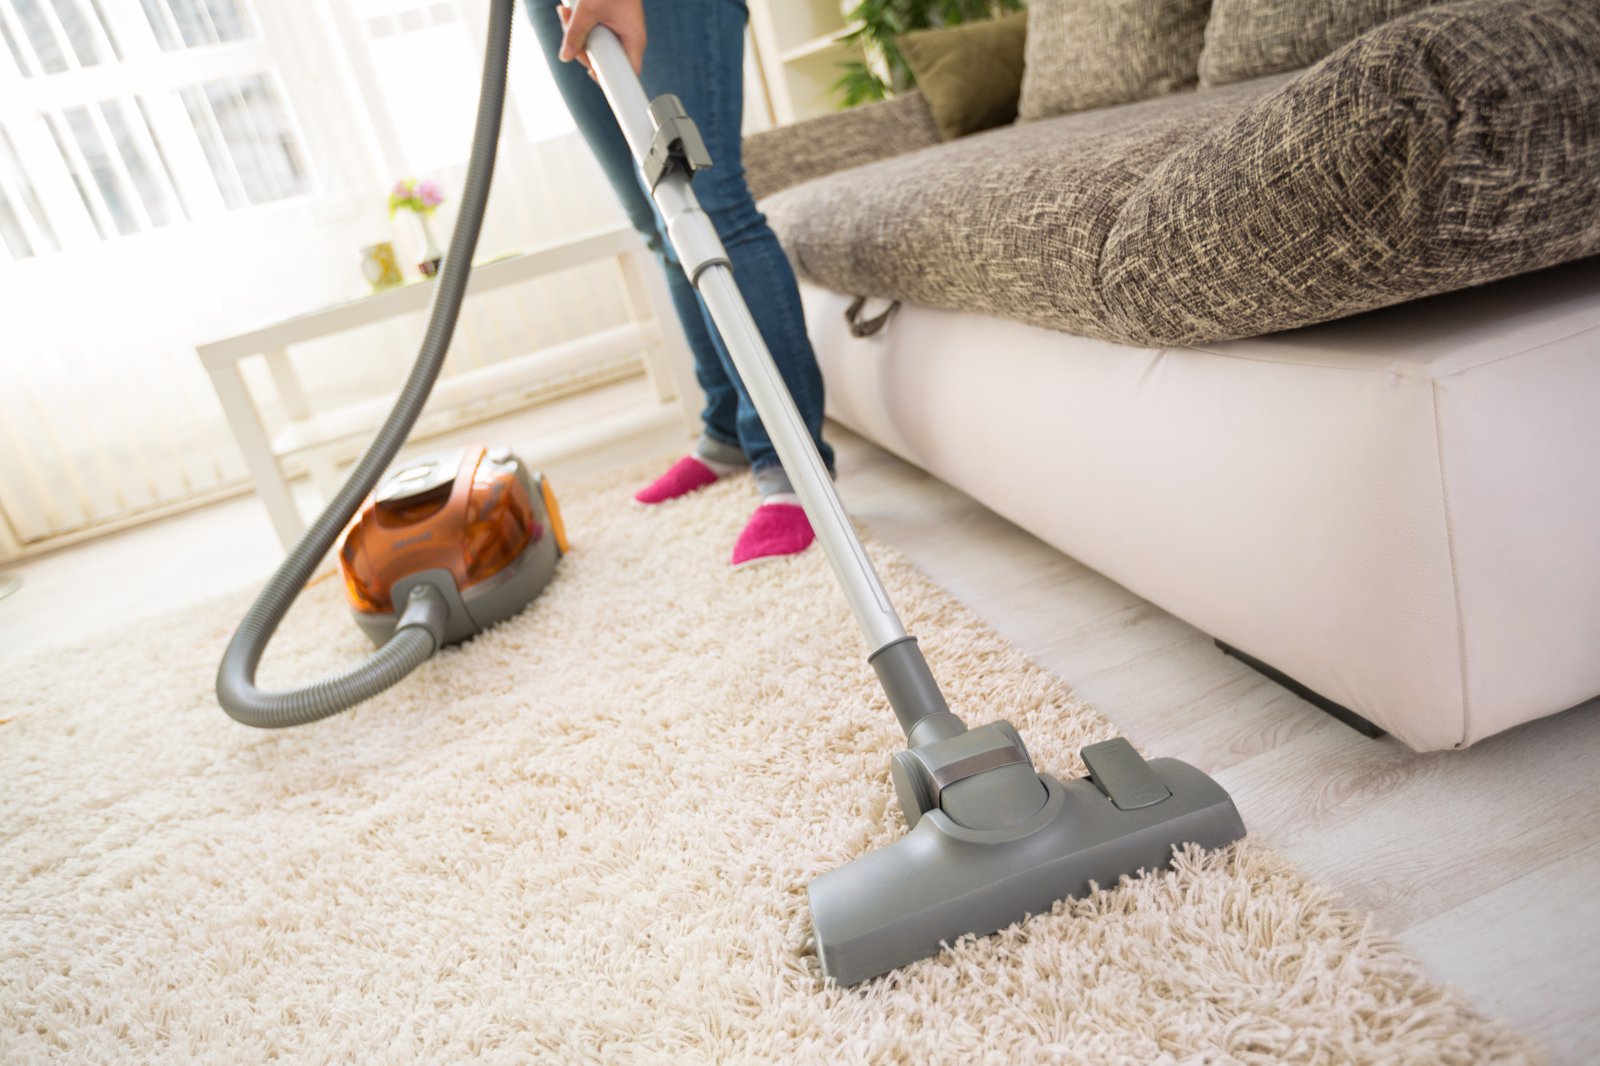 Carpet cleaning in Watsonia